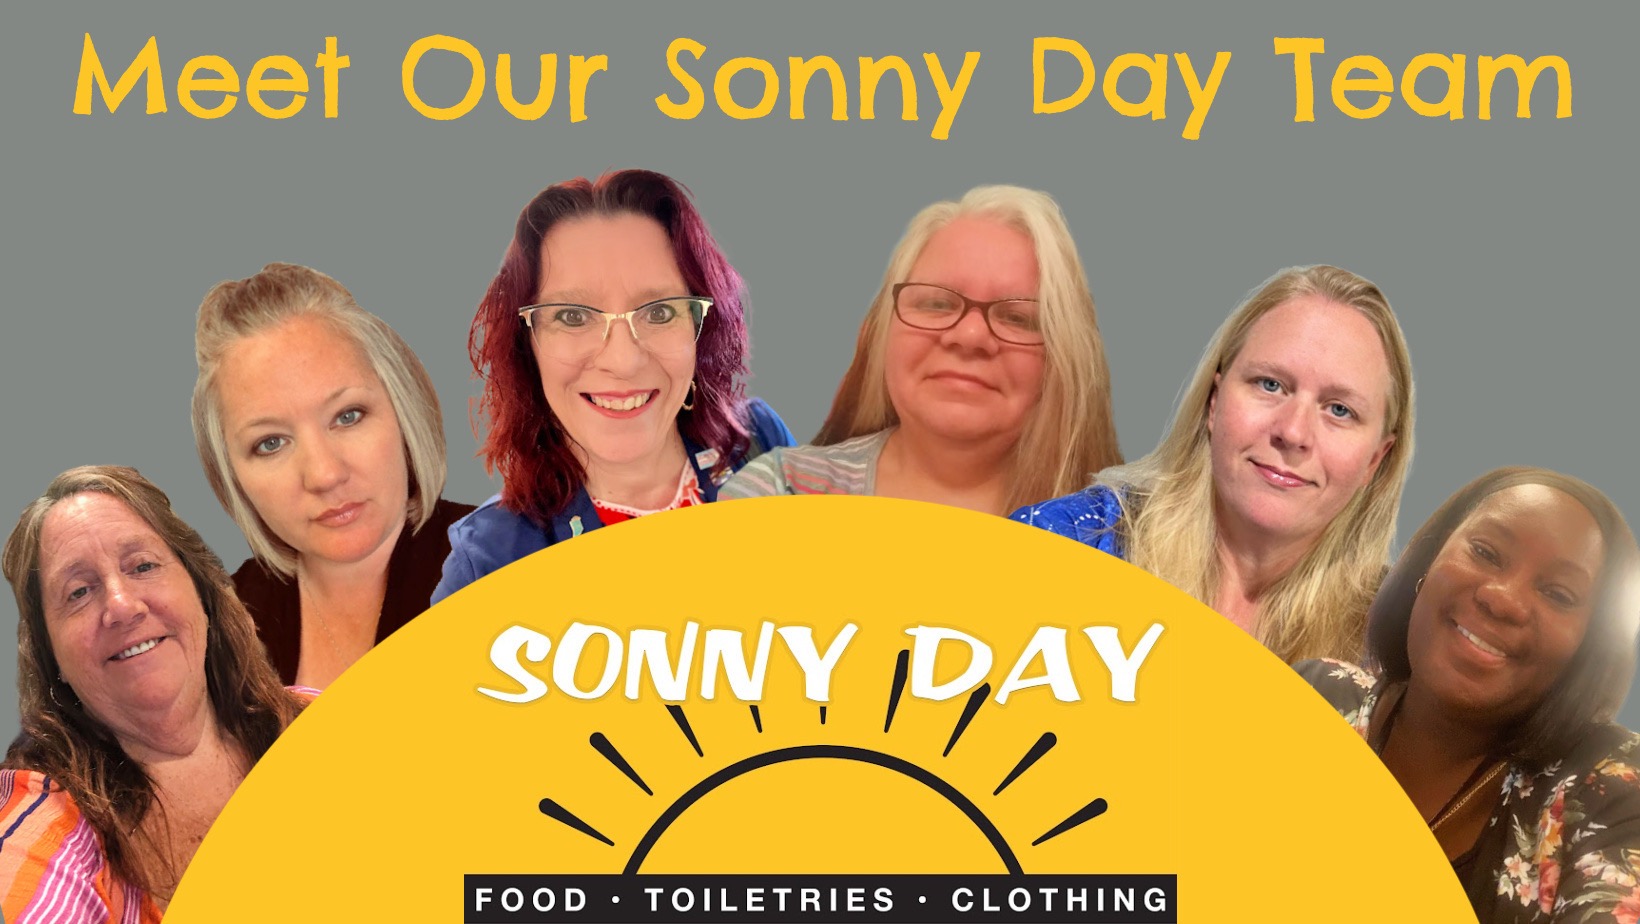 Meet Our Sonny Day Team